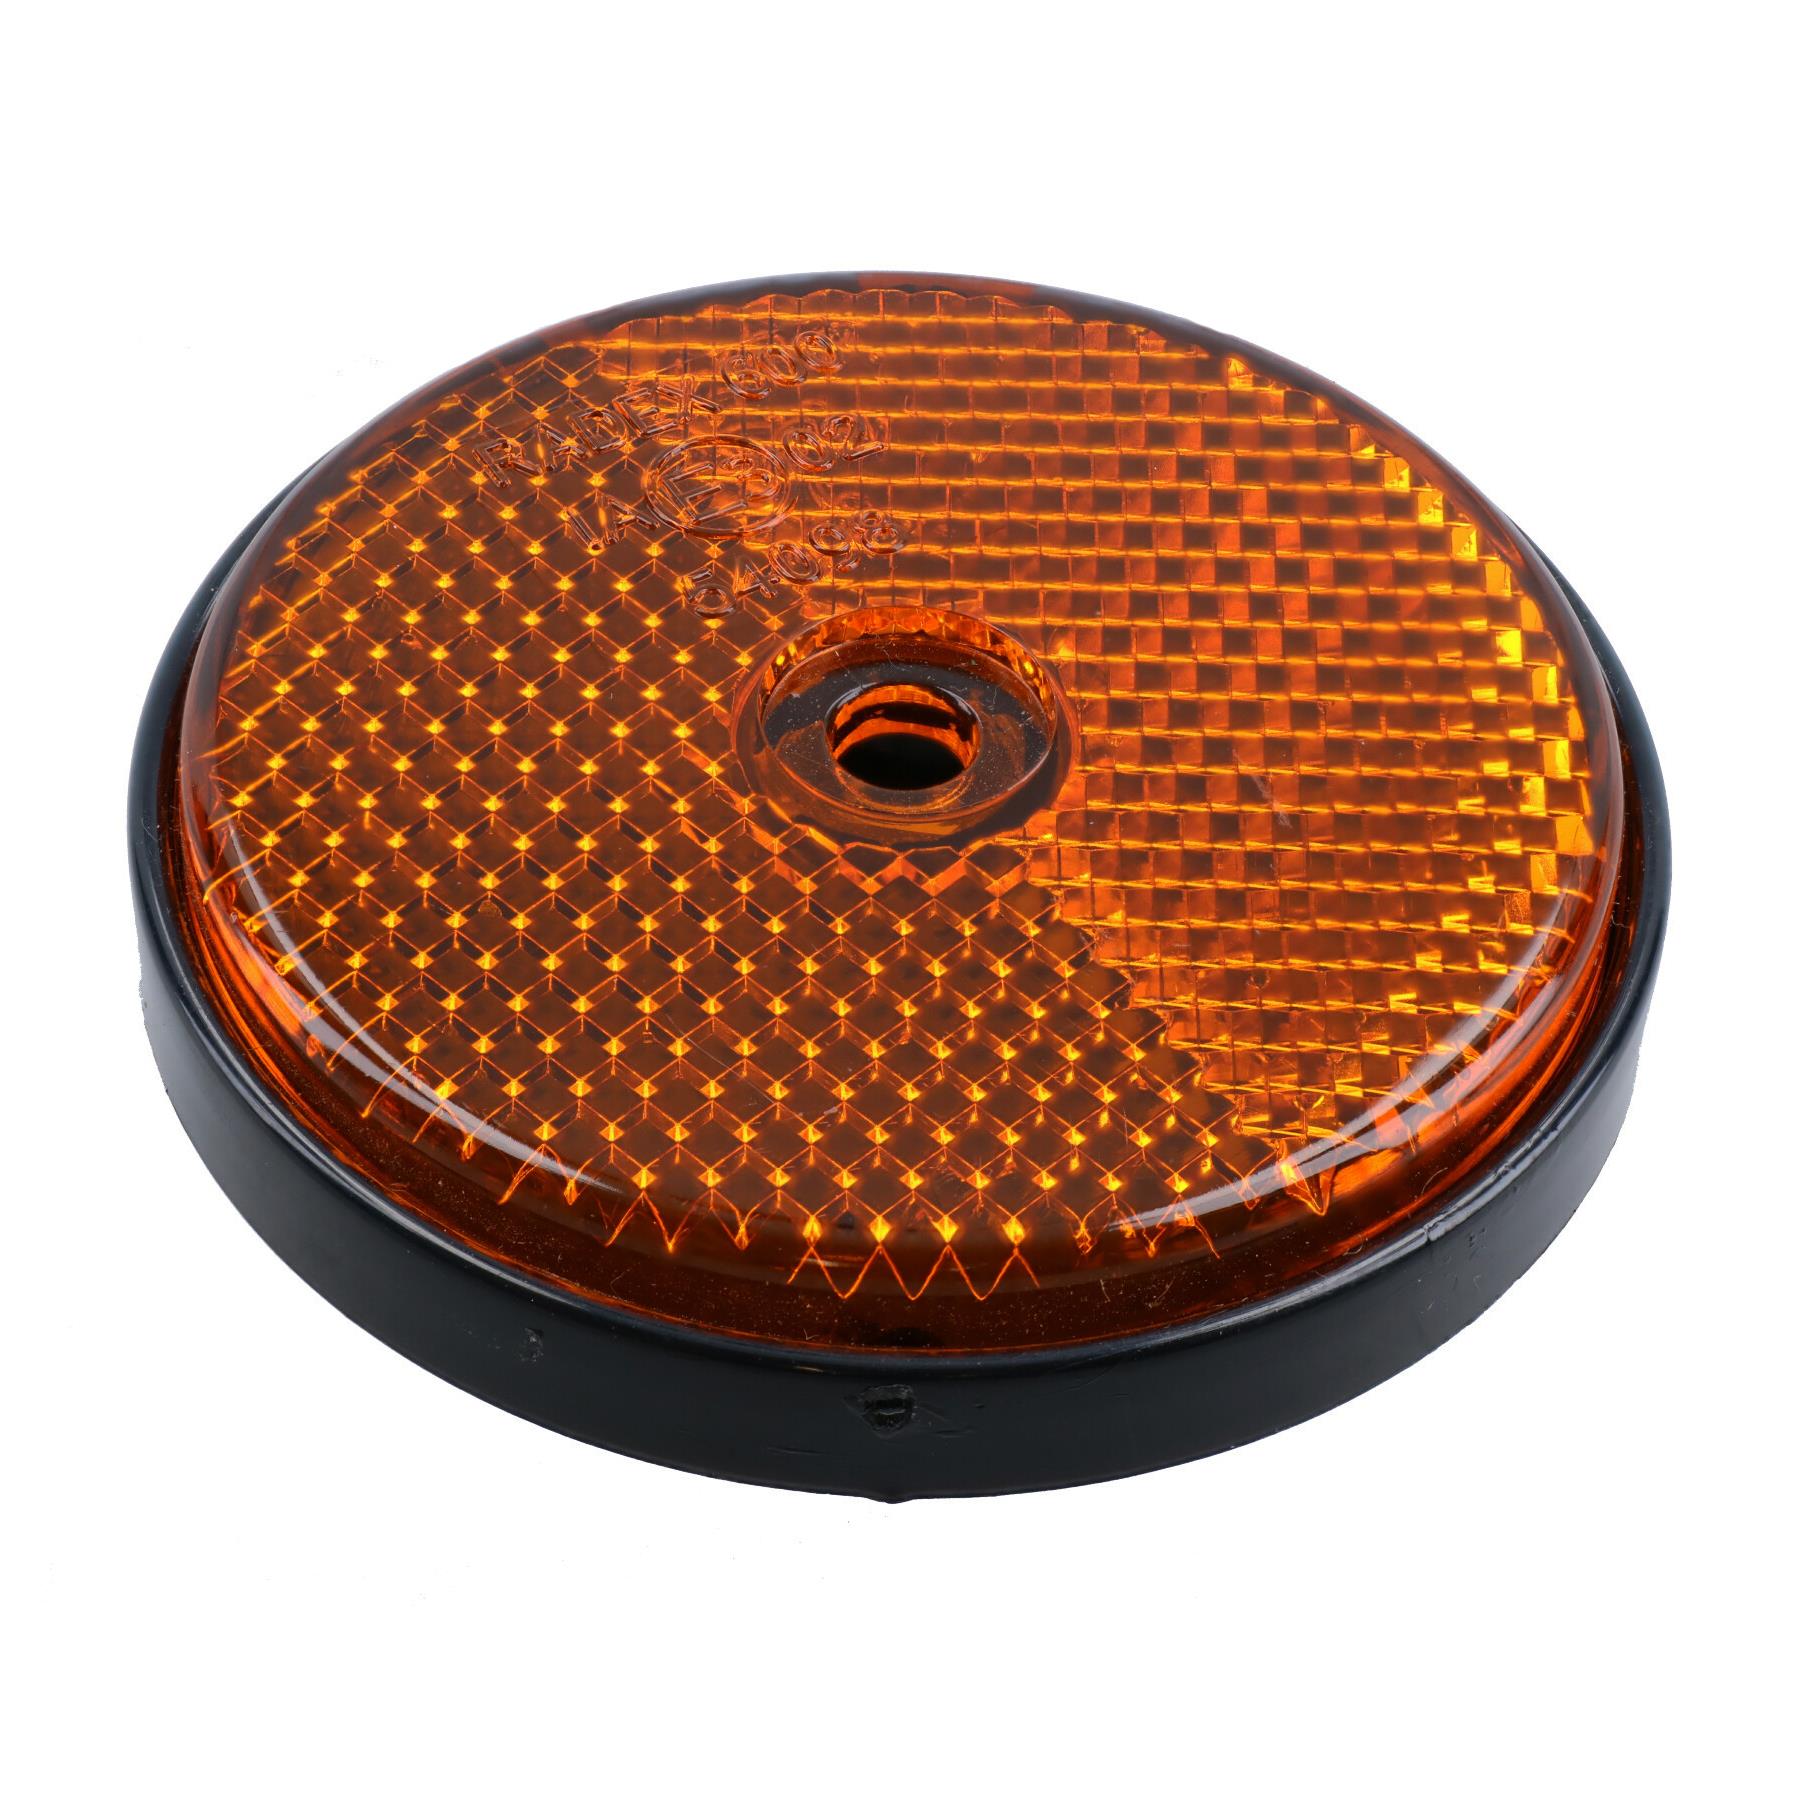 Orange Amber Round Circular Reflectors for Driveway Gate Fence Post Trailers